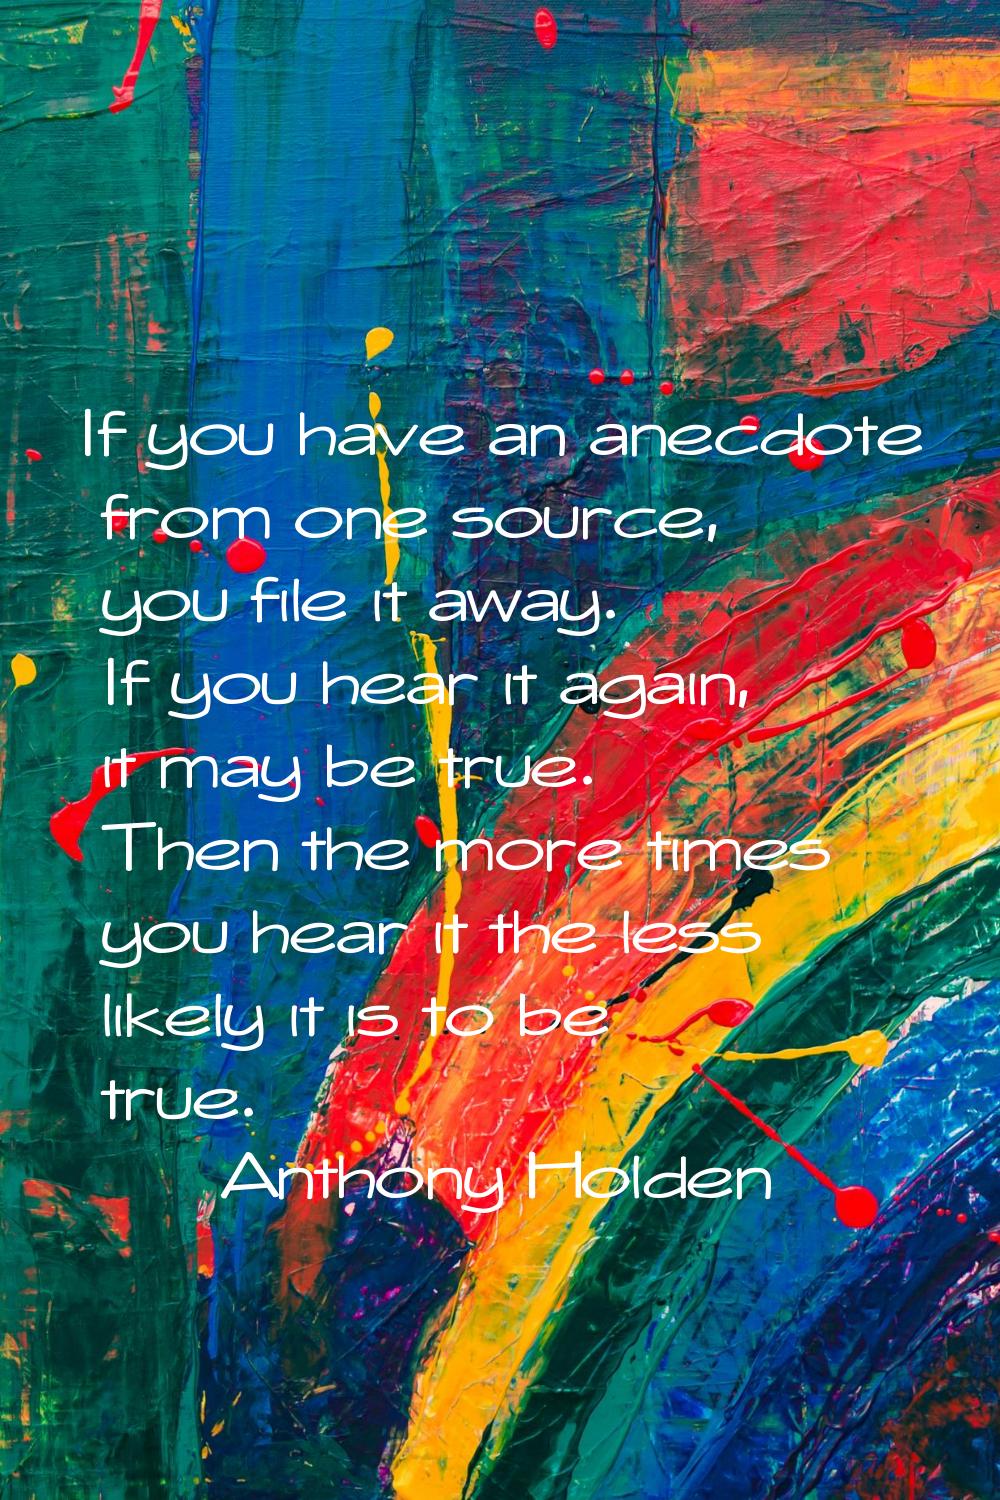 If you have an anecdote from one source, you file it away. If you hear it again, it may be true. Th